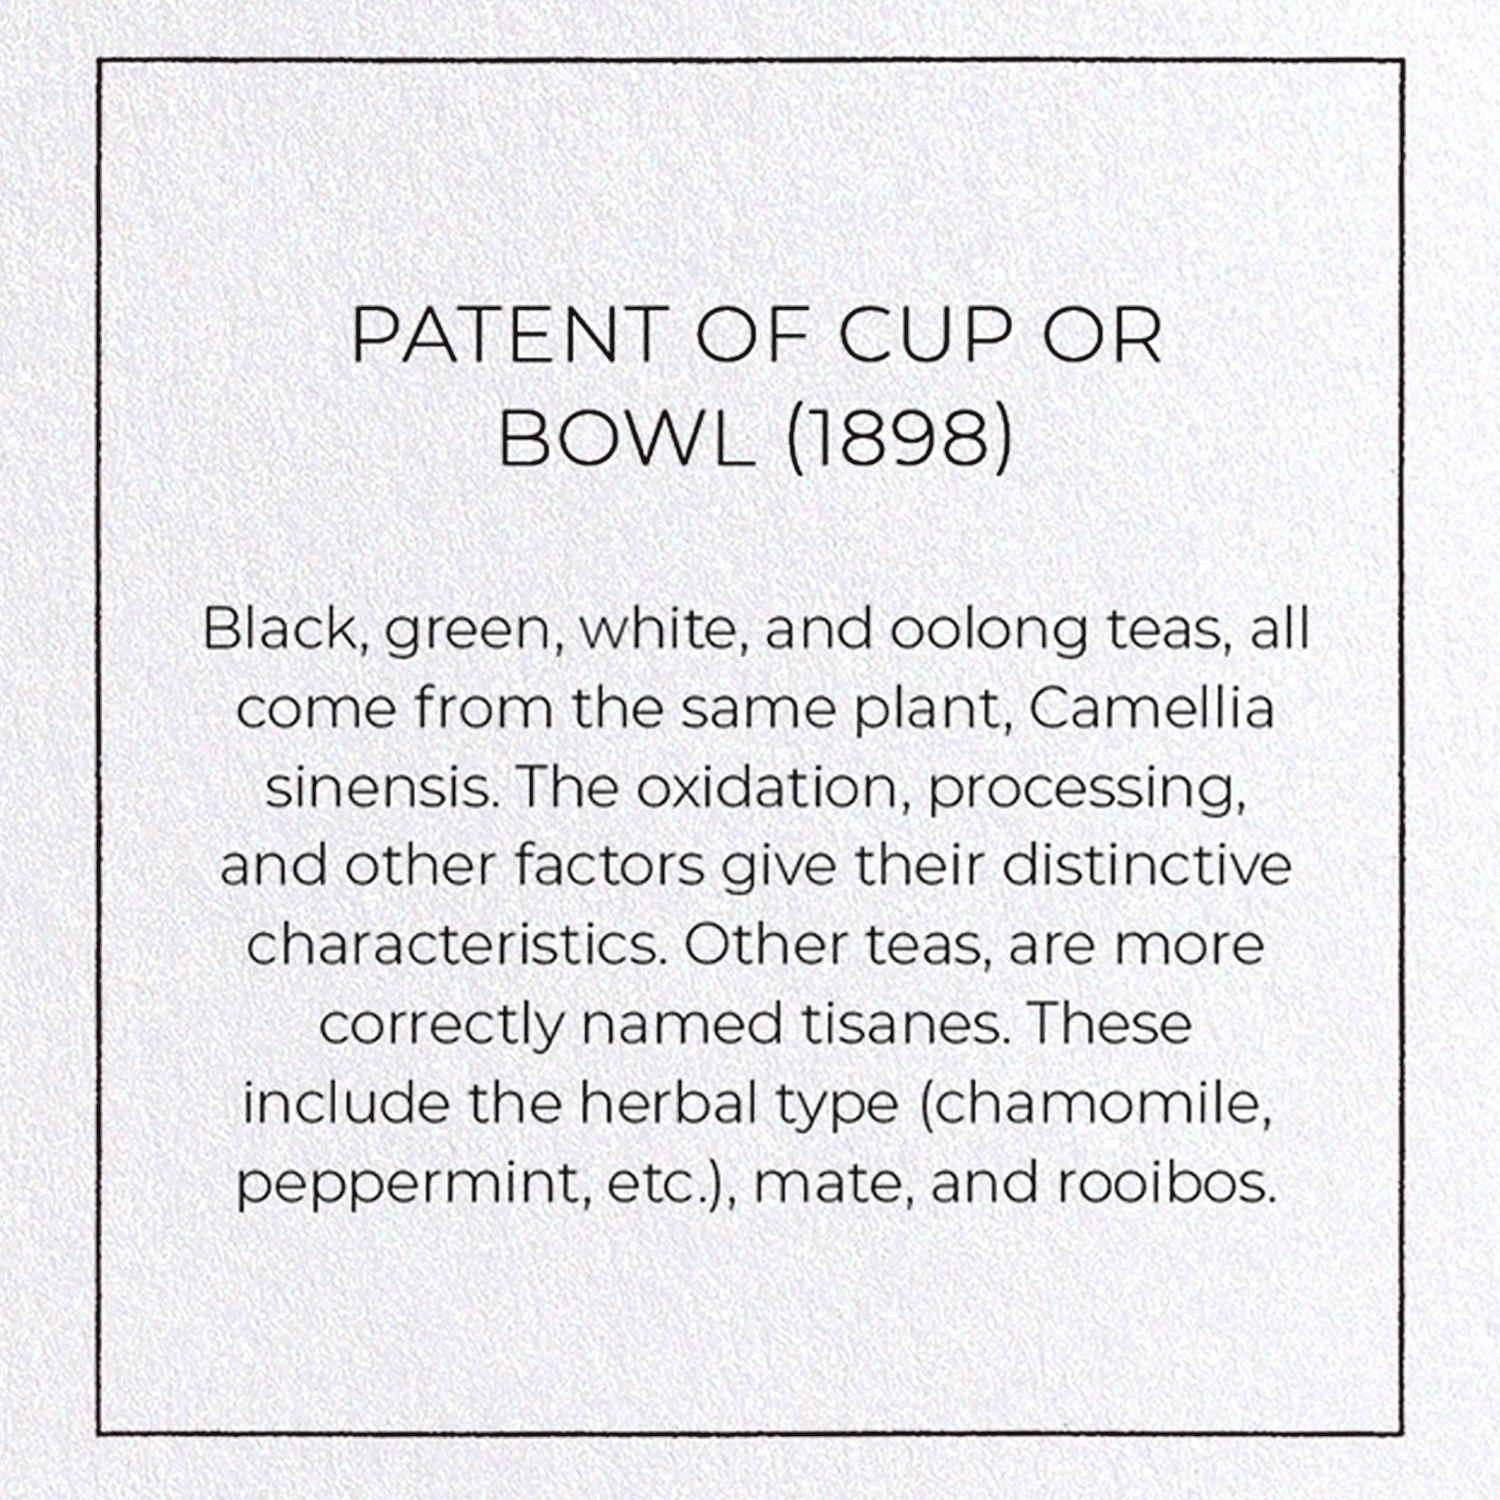 PATENT OF CUP OR BOWL (1898): Patent Greeting Card